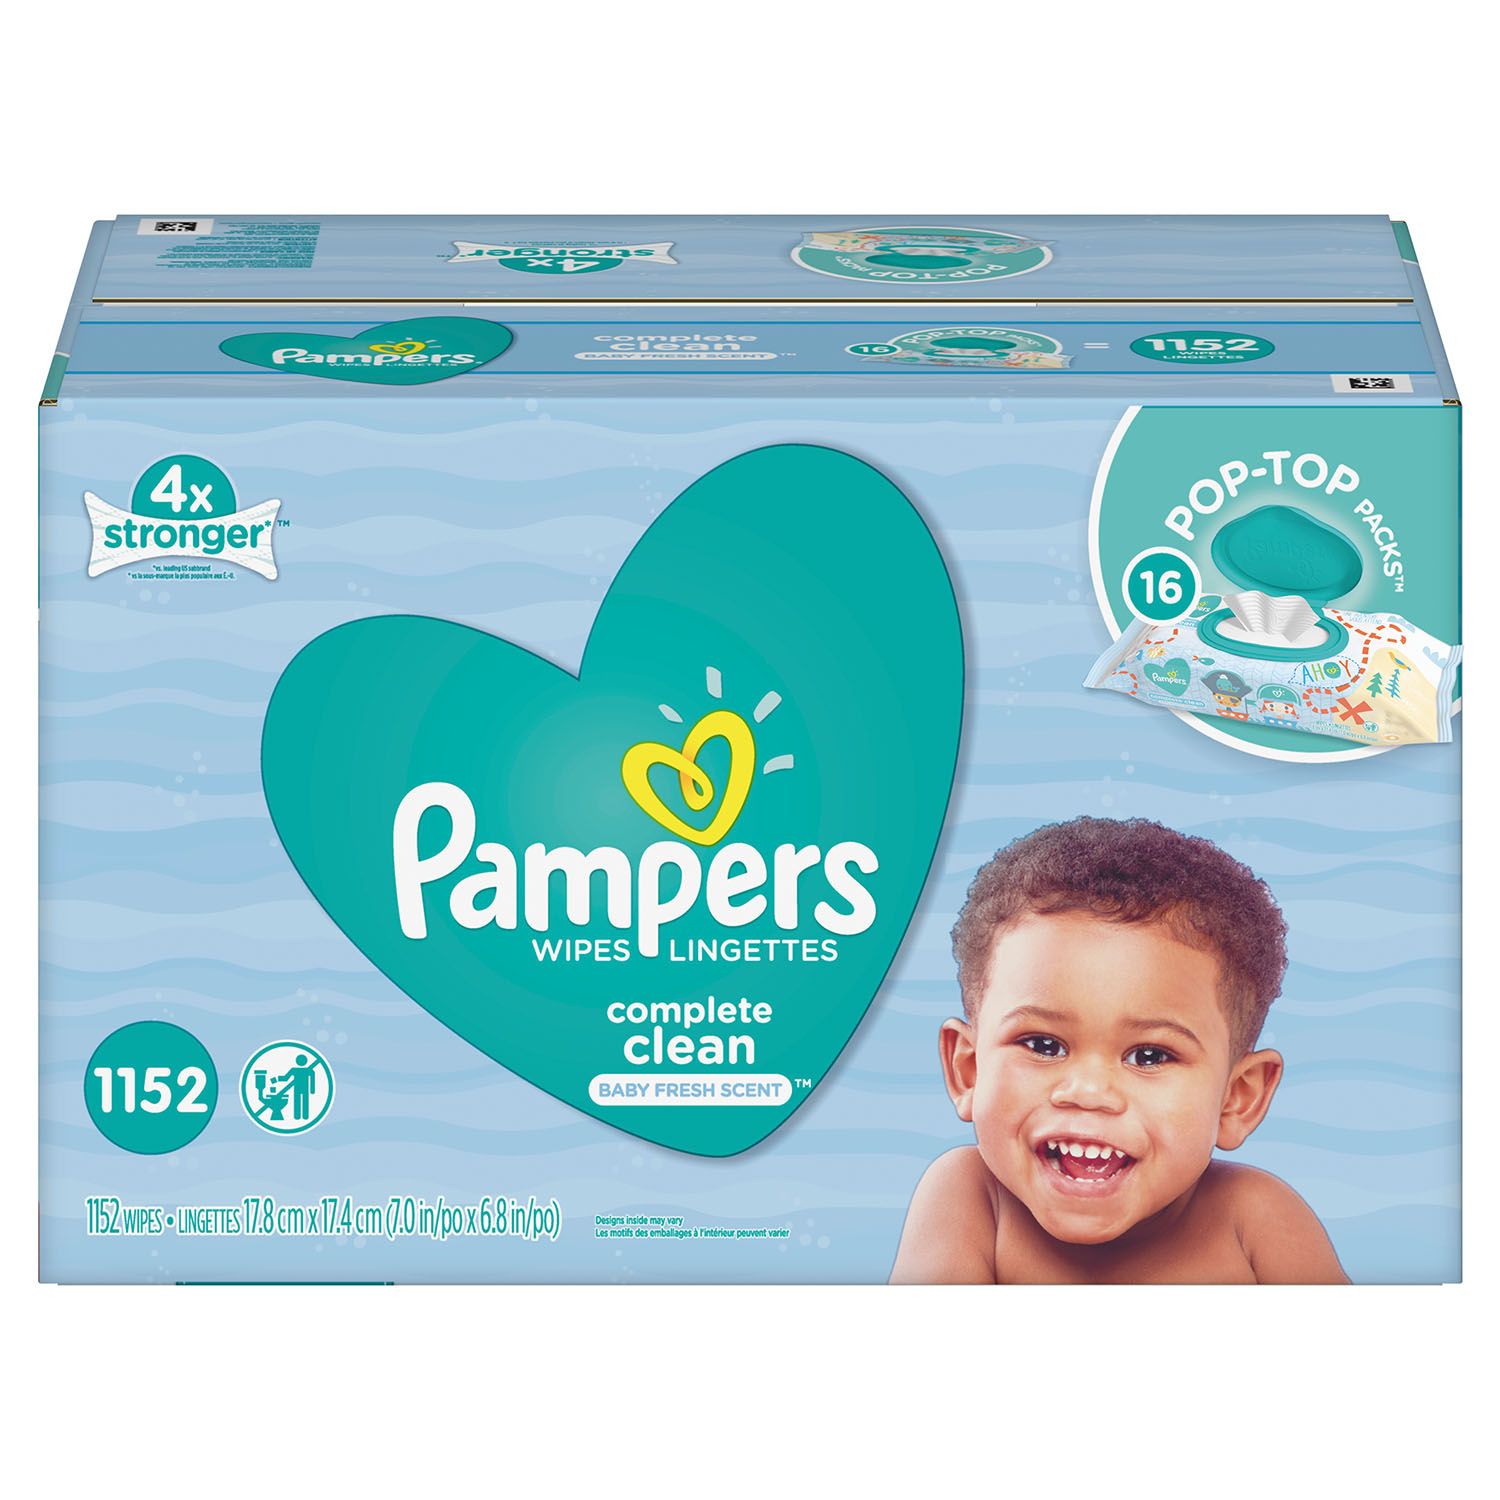 Pampers Baby Wipes, Complete Clean (1200 ct.)